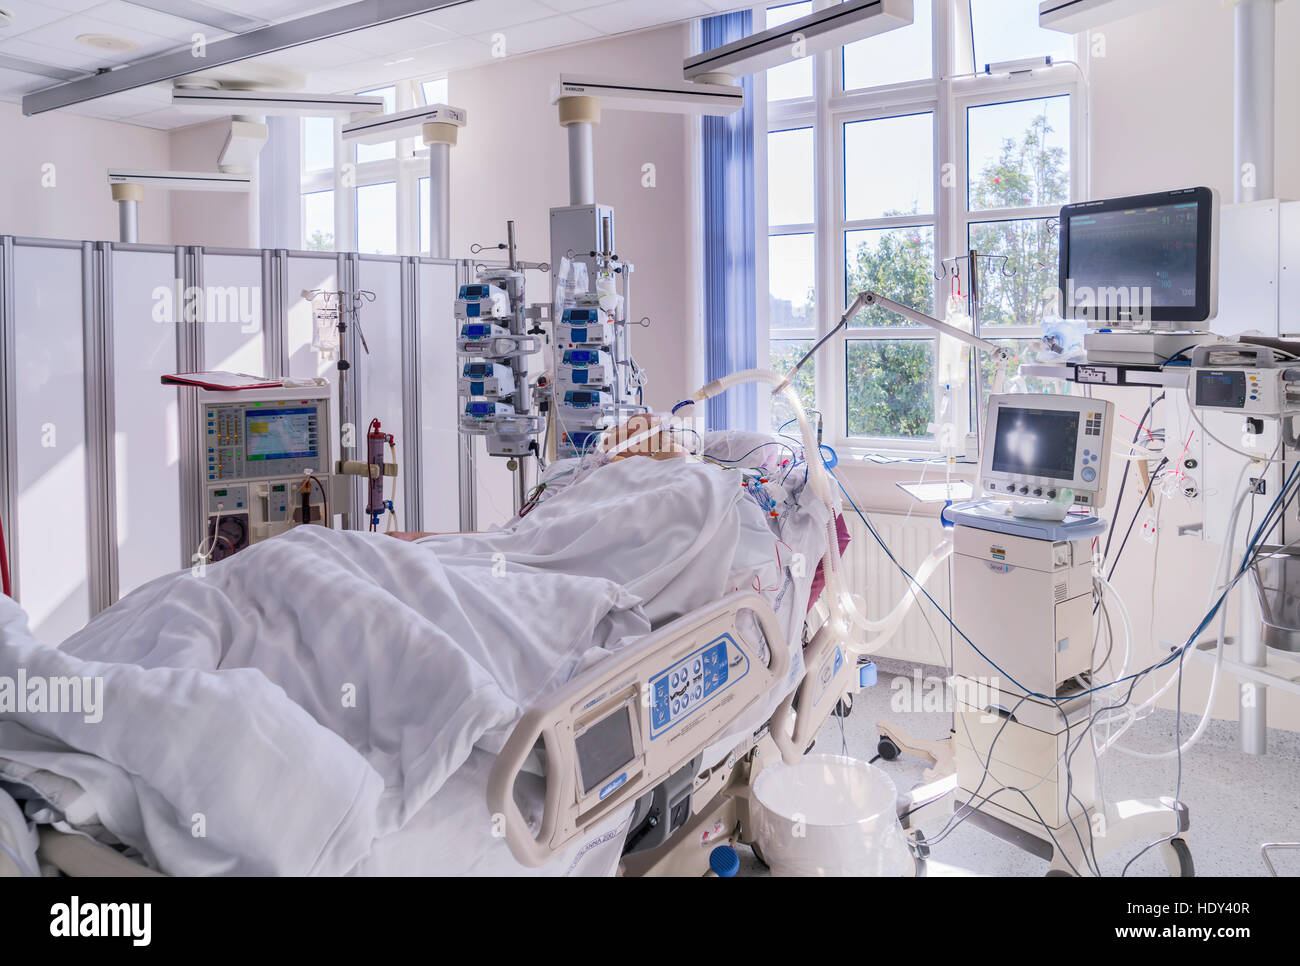 Patient in recovery after heart valve replacement surgery, operating room, Reykjavik, Iceland Stock Photo